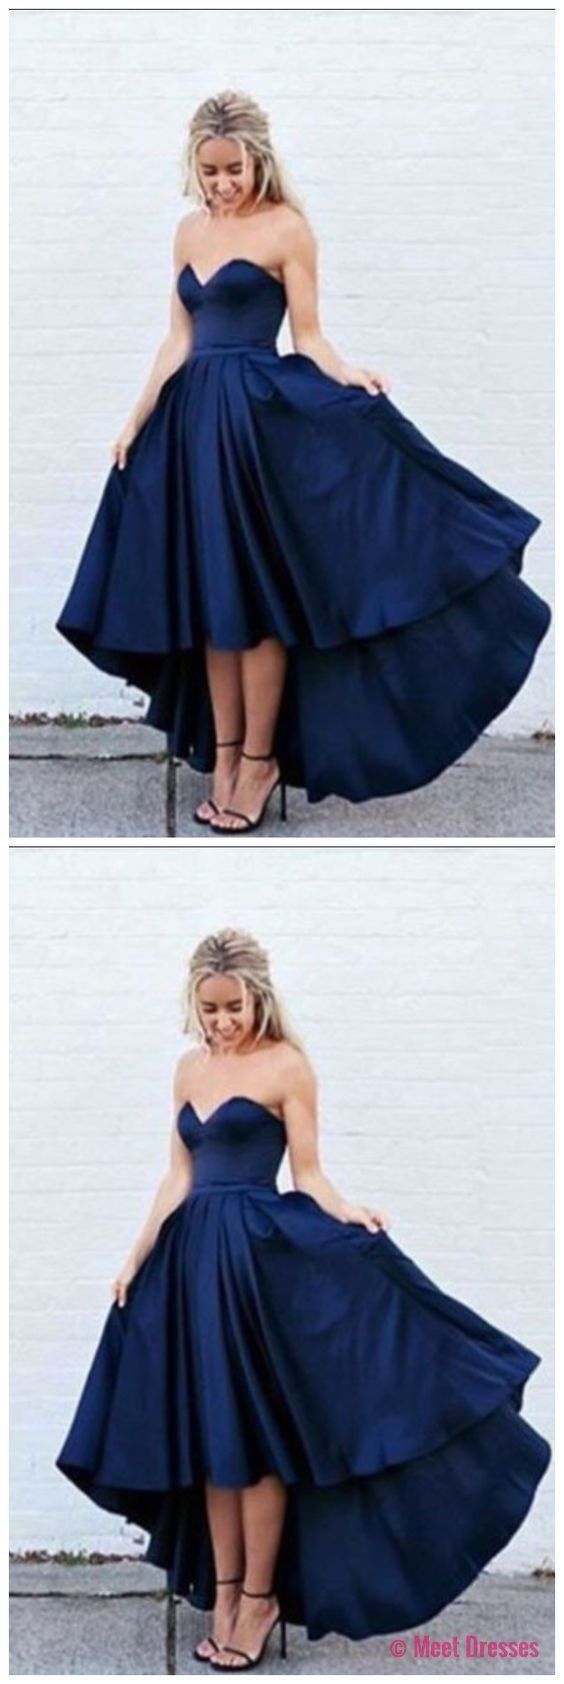 Wedding - New Arrival Simple Dark Navy Blue High-low Prom Dress PD20189757